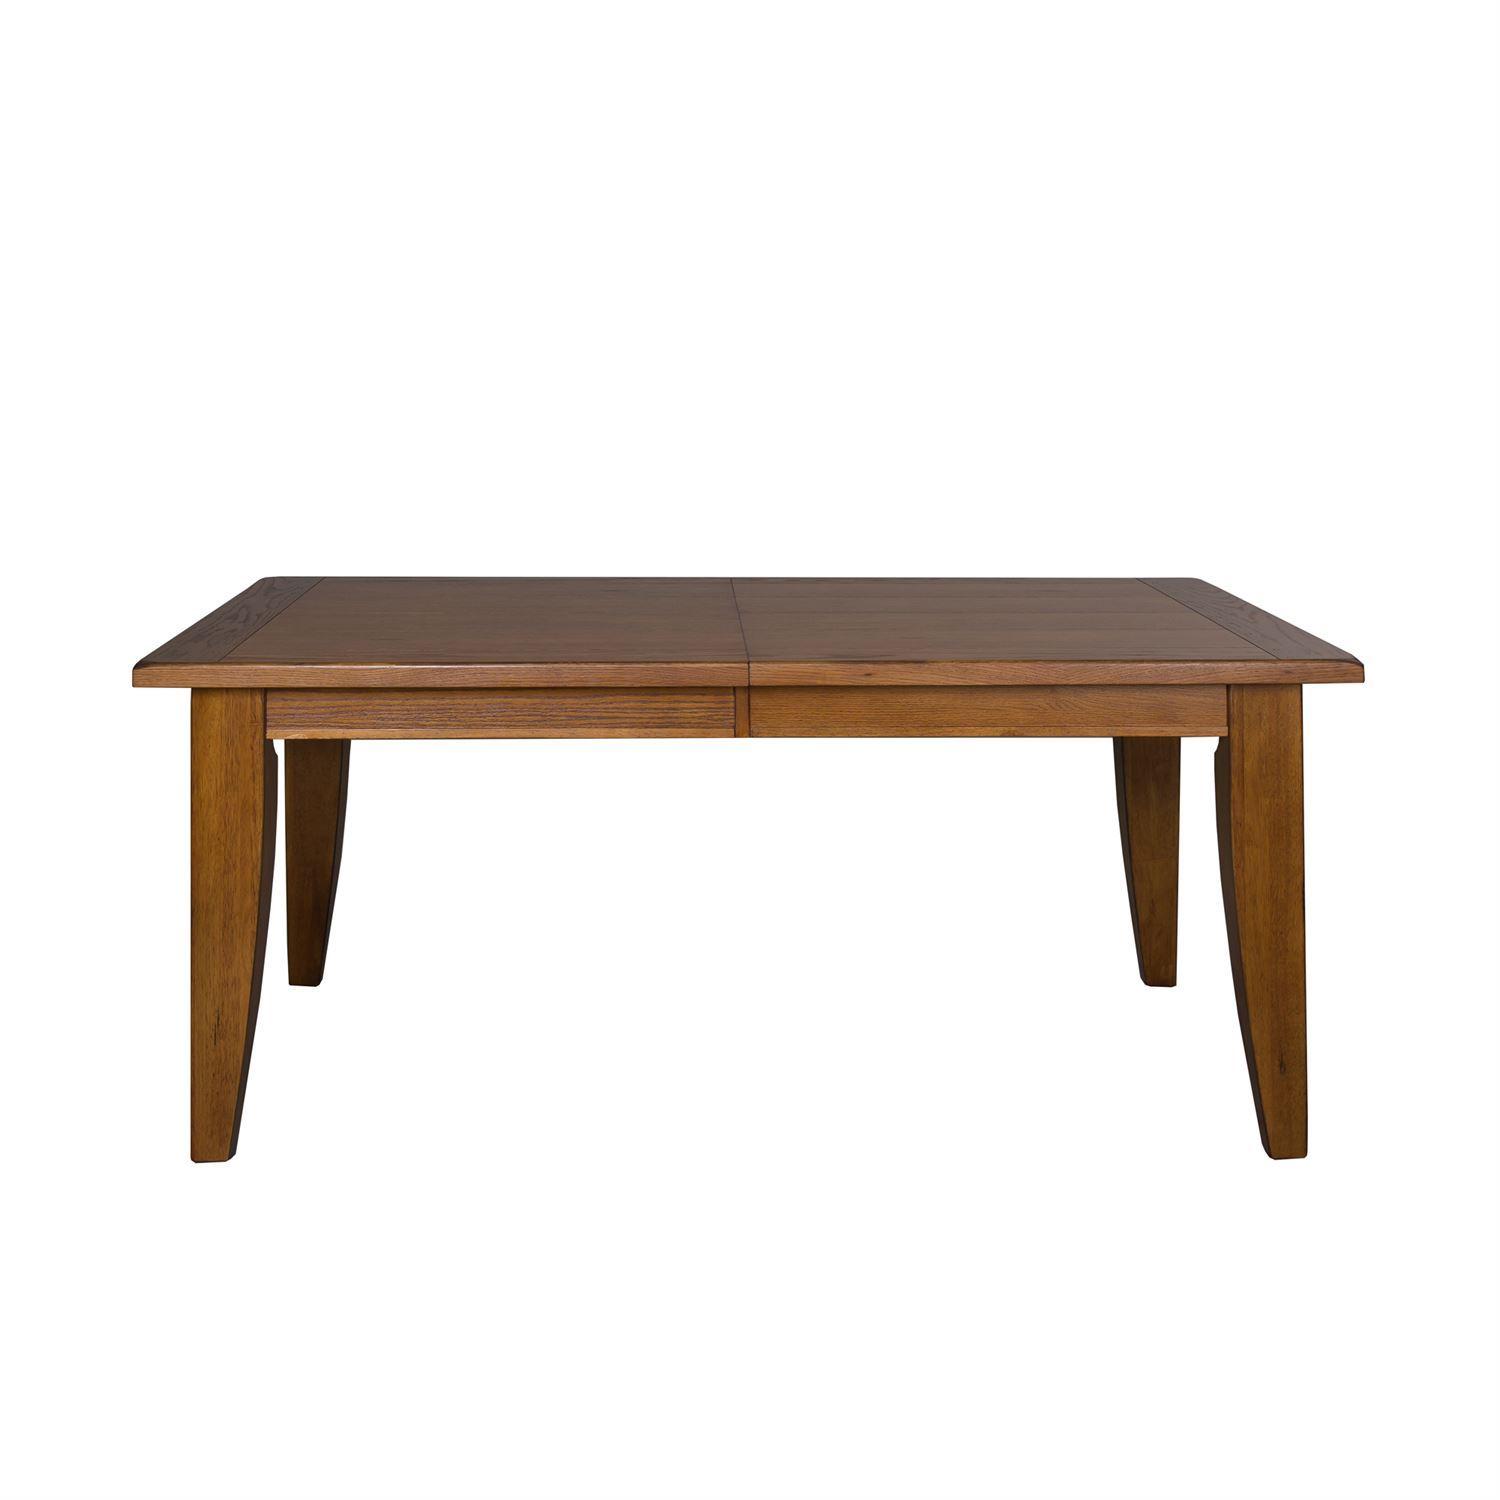   Treasures  (17-DR) Dining Table  